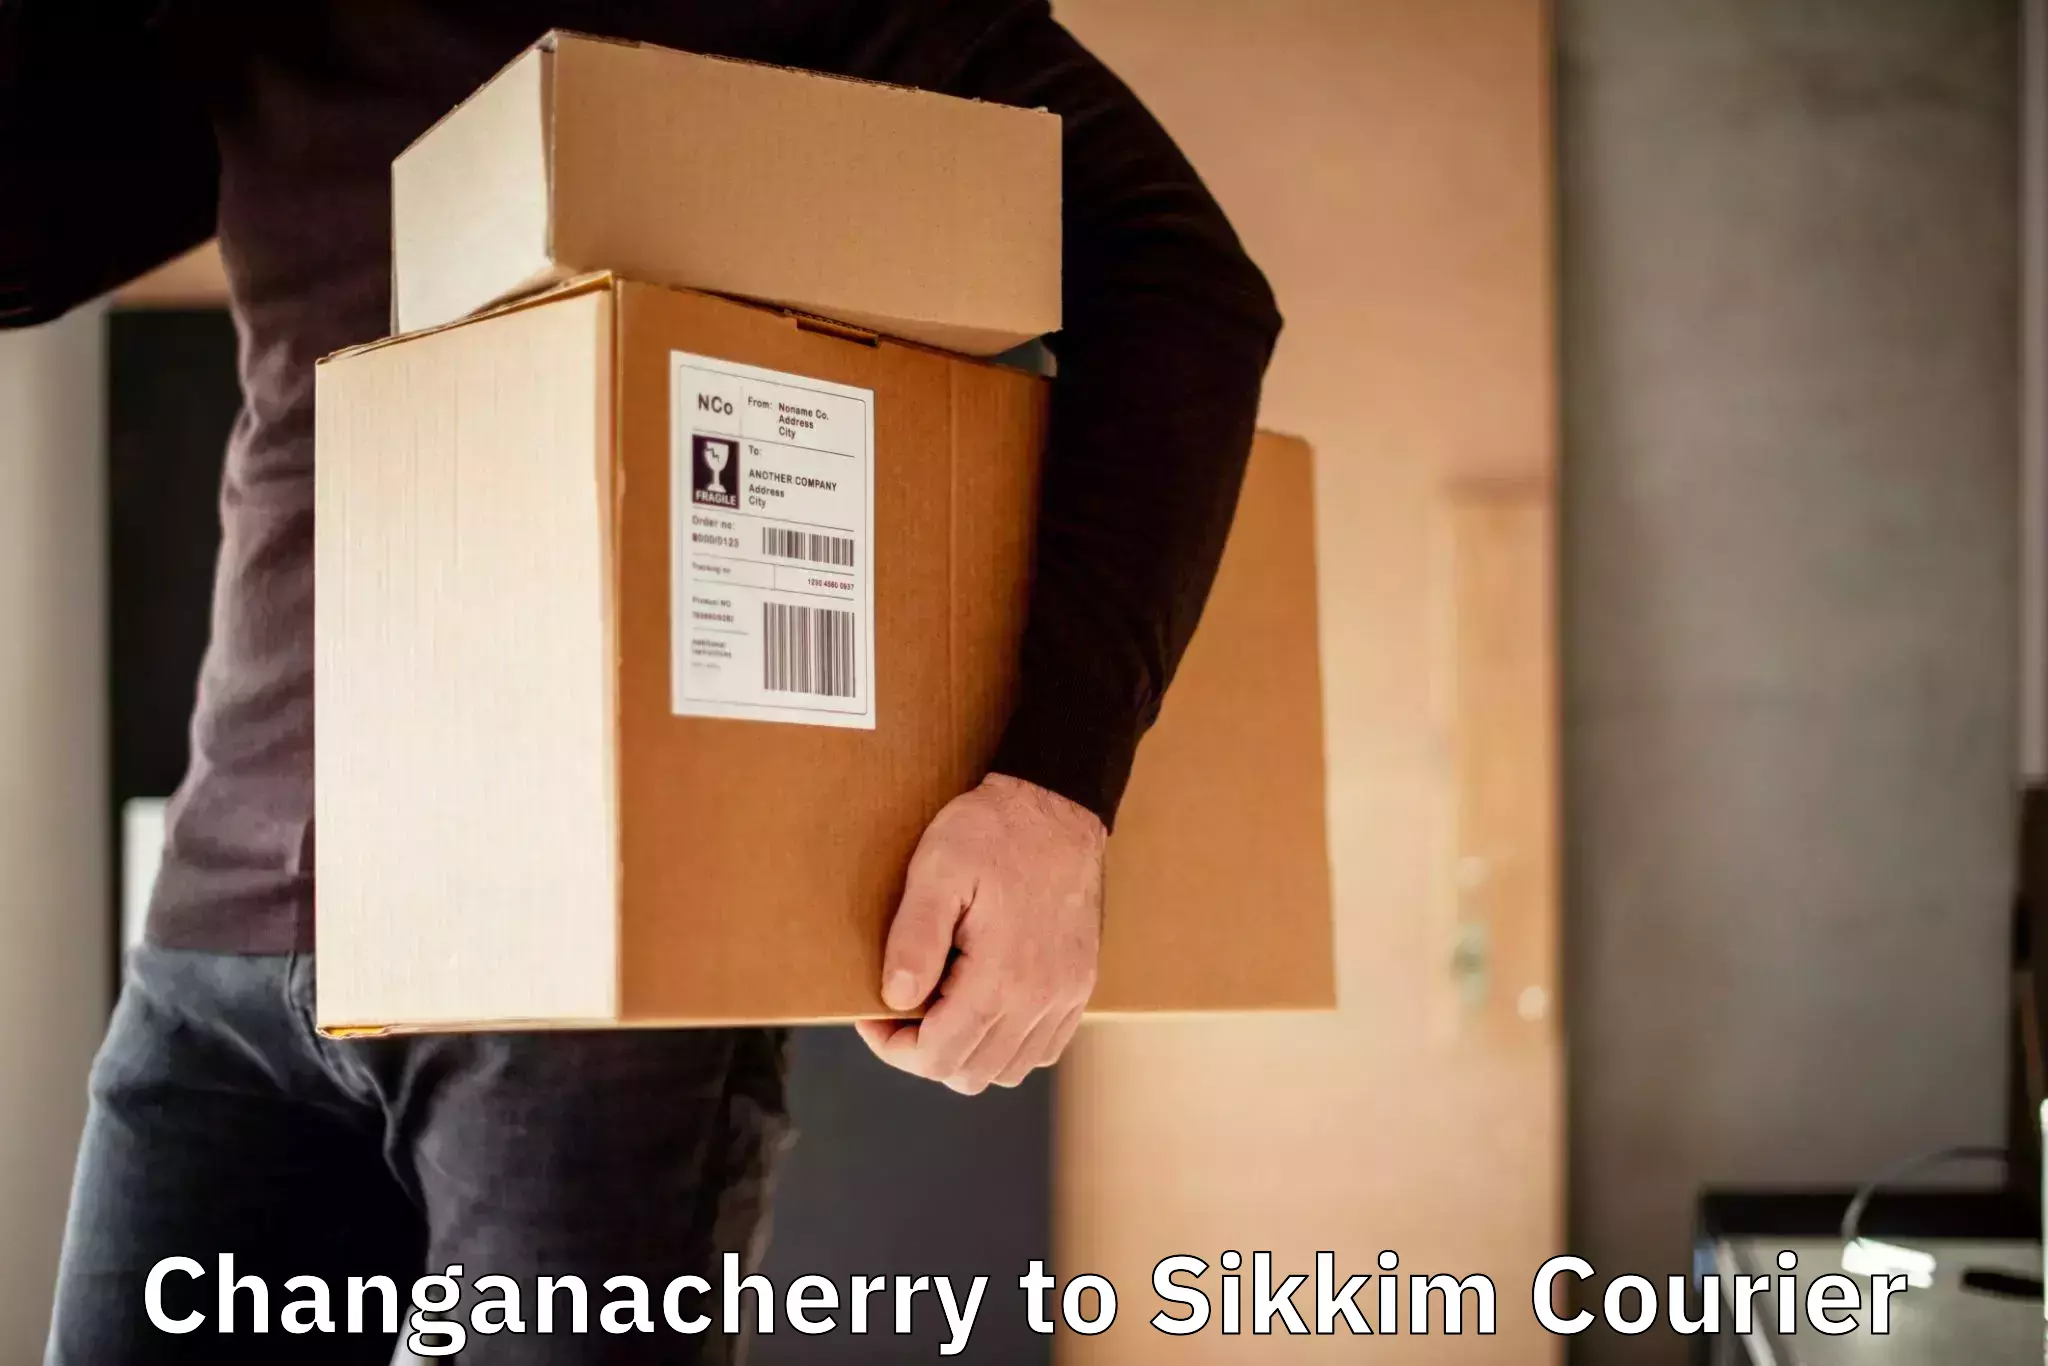 Speedy delivery service Changanacherry to South Sikkim